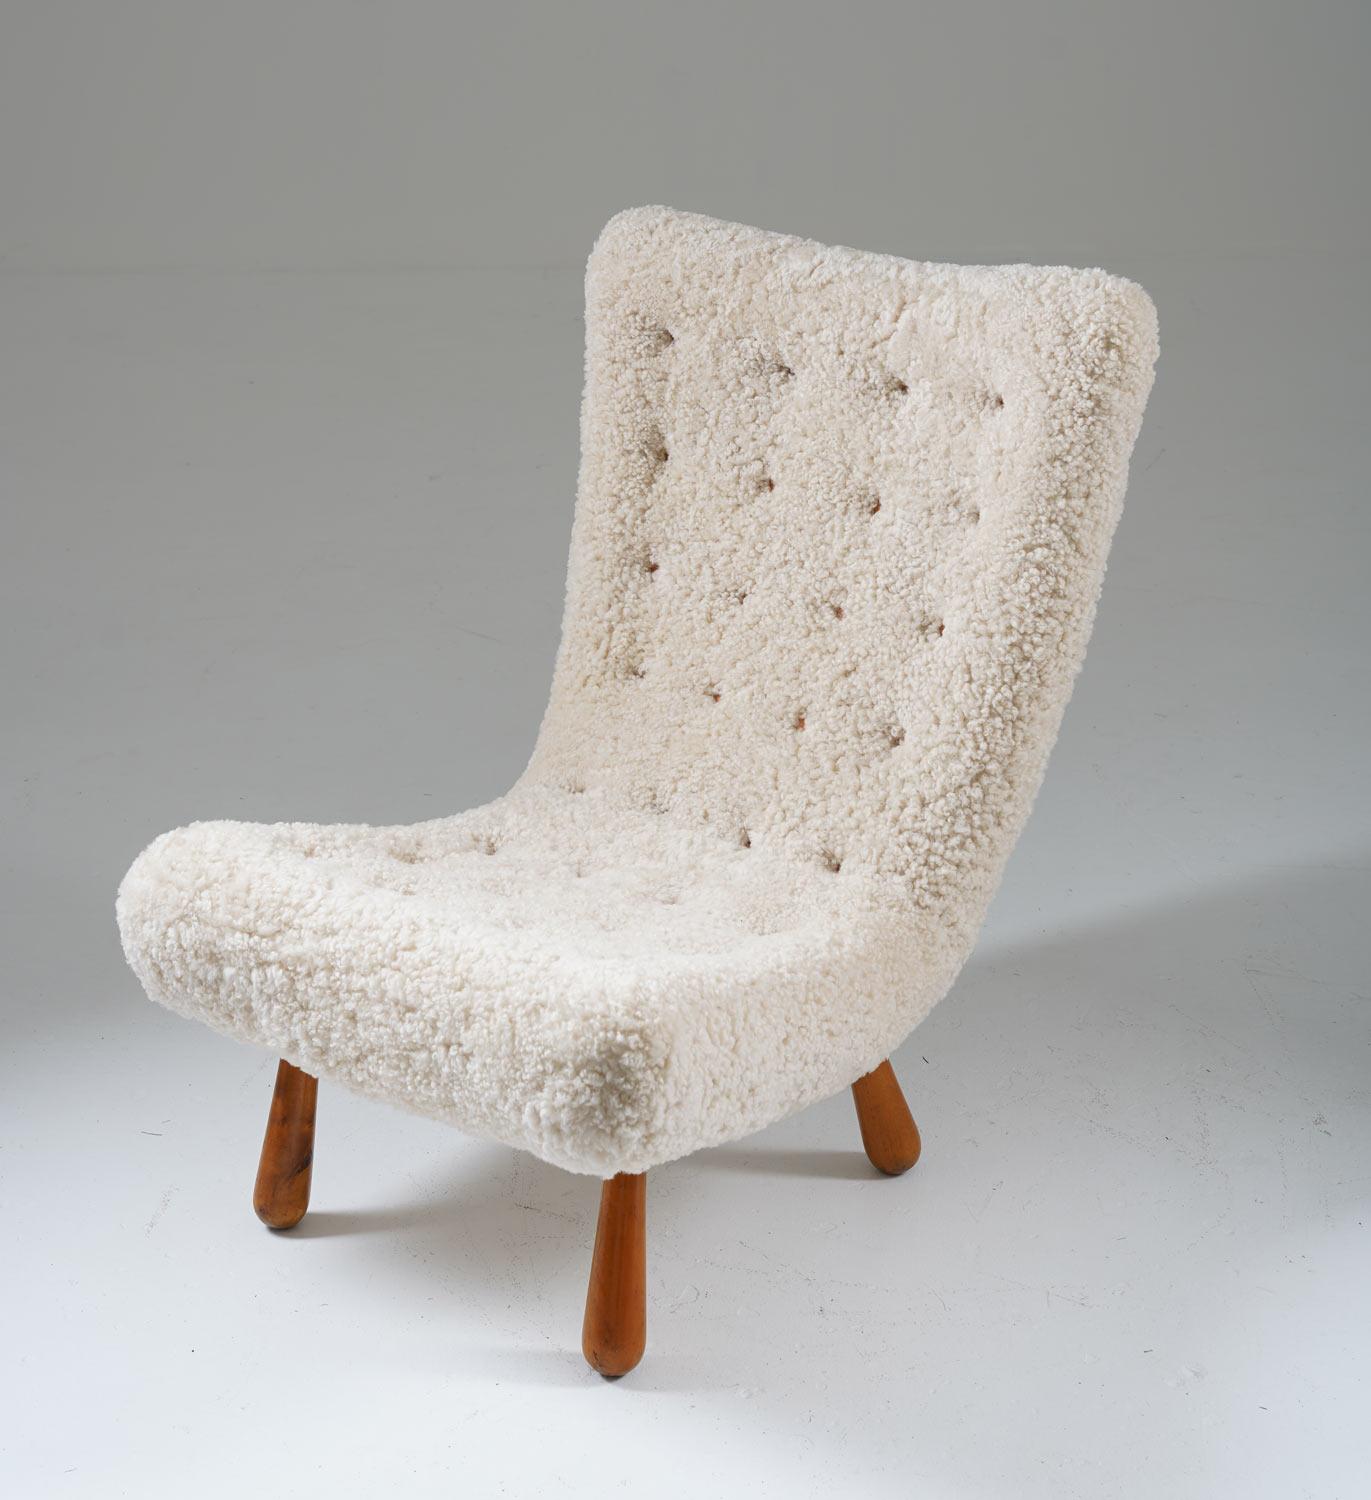 Rare version of the famous clam chair, upholstered in off-white sheepskin and leather buttons. This chair was most likely manufactured in Sweden, circa 1940. 

Condition: Very good condition, fully restored and reupholstered.